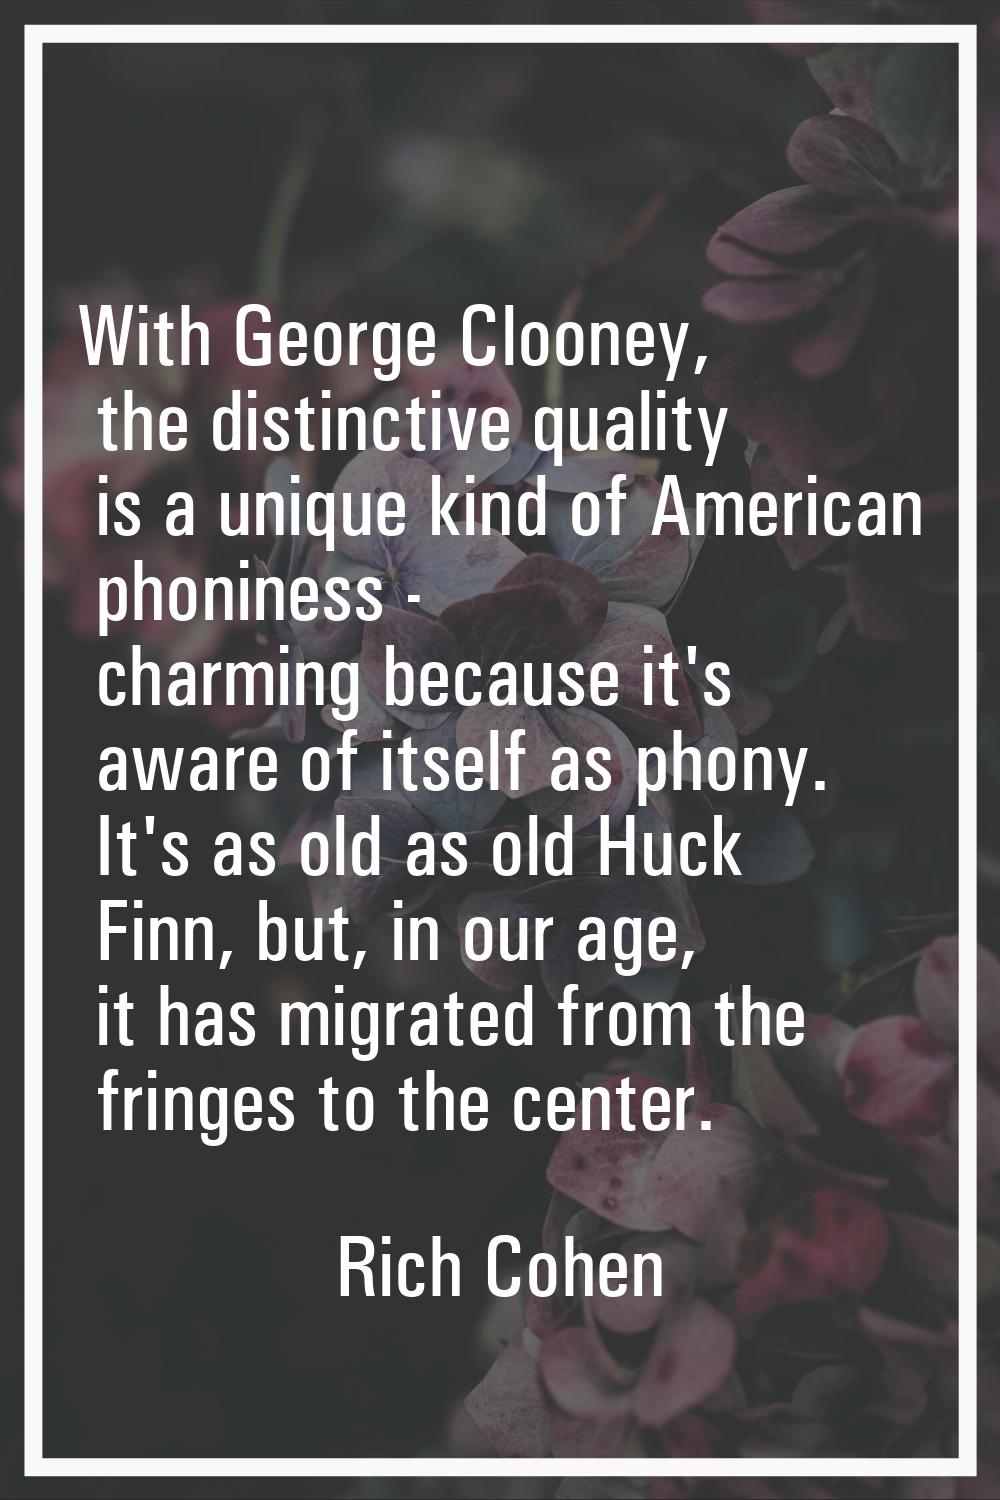 With George Clooney, the distinctive quality is a unique kind of American phoniness - charming beca